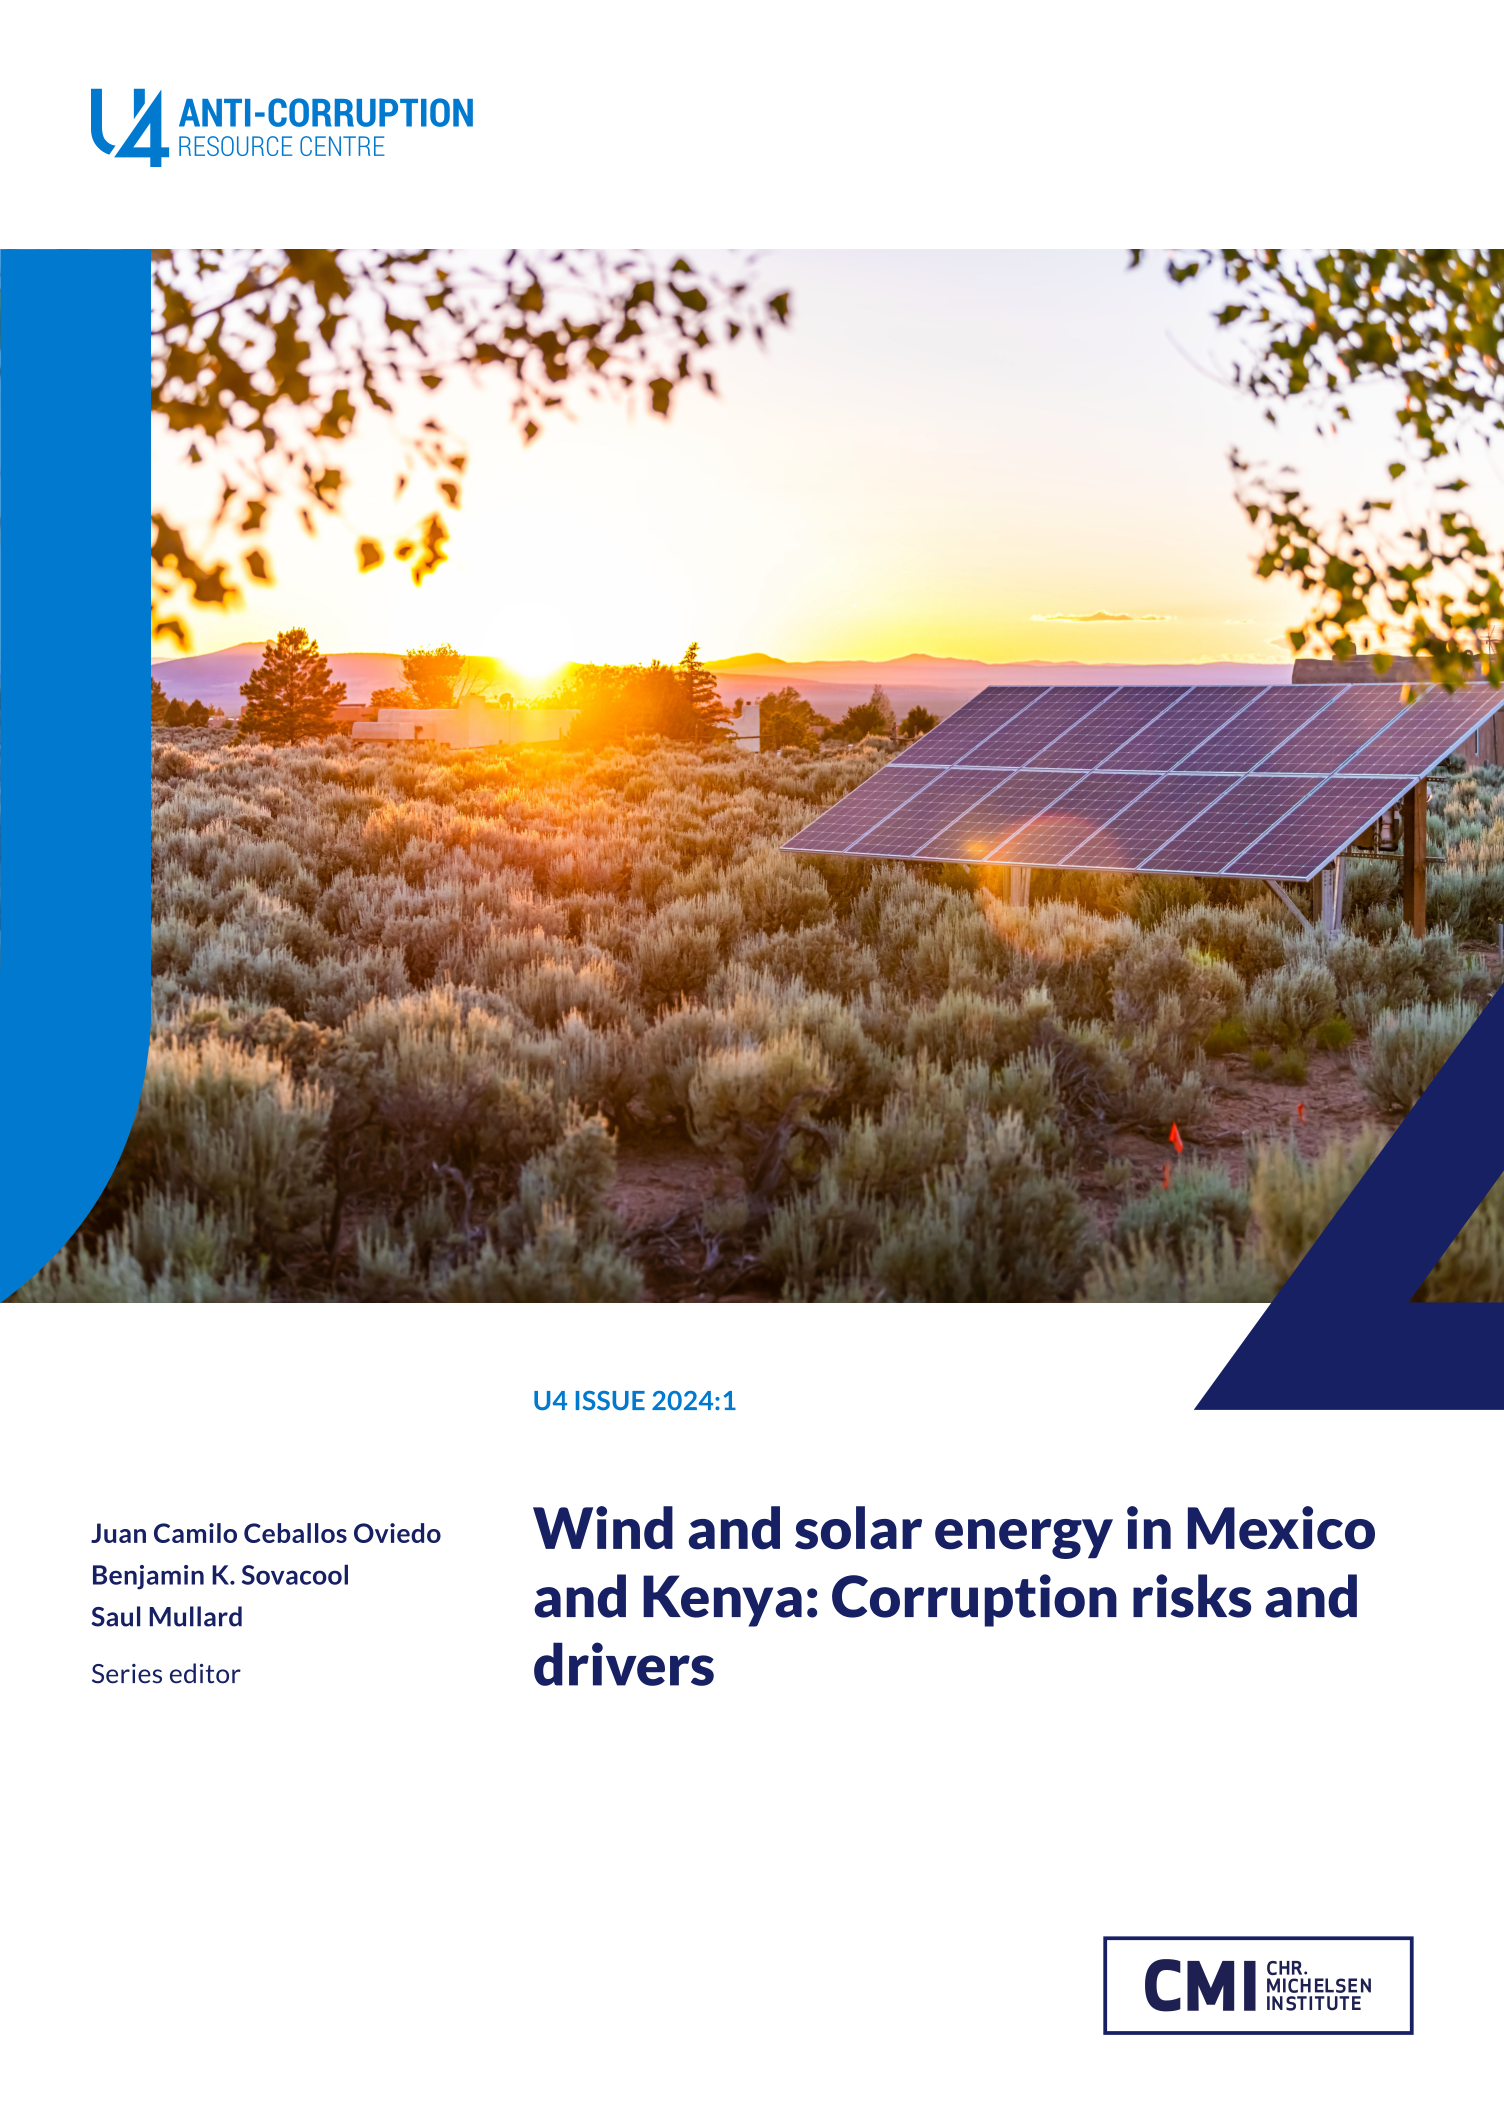 Wind and solar energy in Mexico and Kenya: Corruption risks and drivers